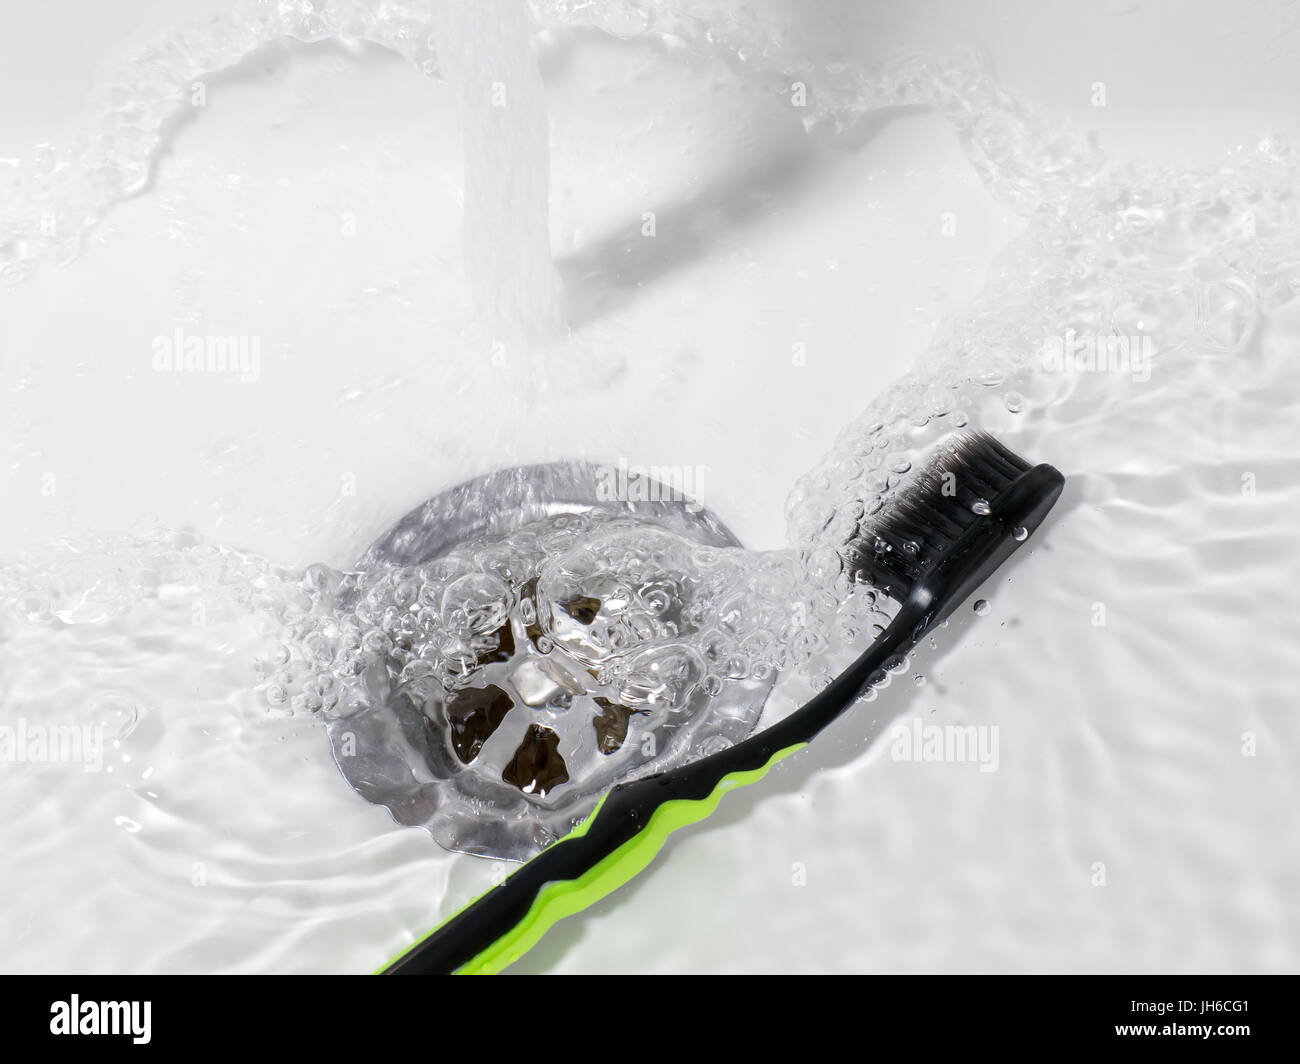 Toothbrush lying in the sink with running water. Bathroom theme Stock Photo